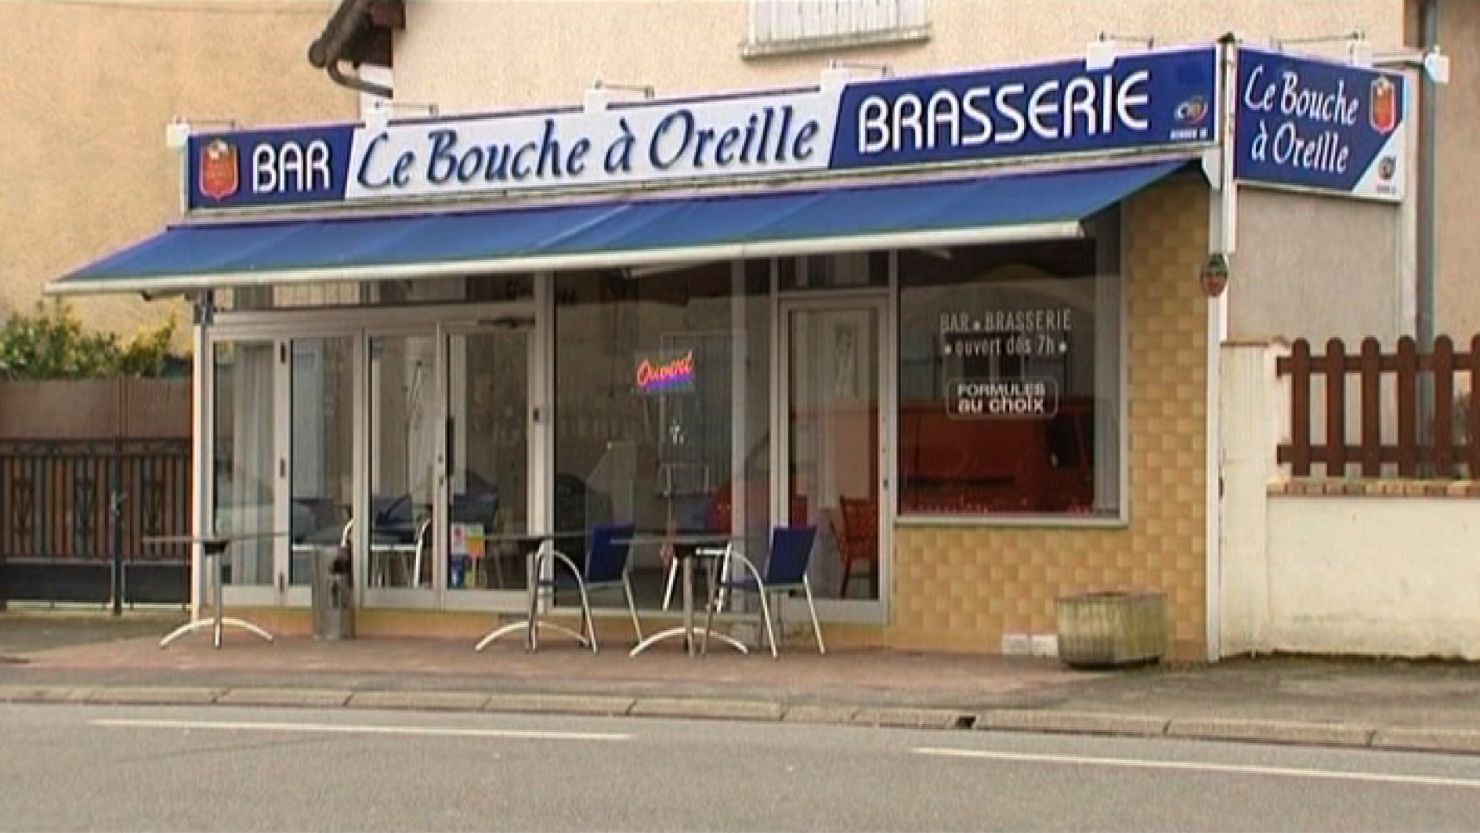 Le Bouche à Oreille in Bourges, France, has received good online reviews since its accidental Michelin honor.